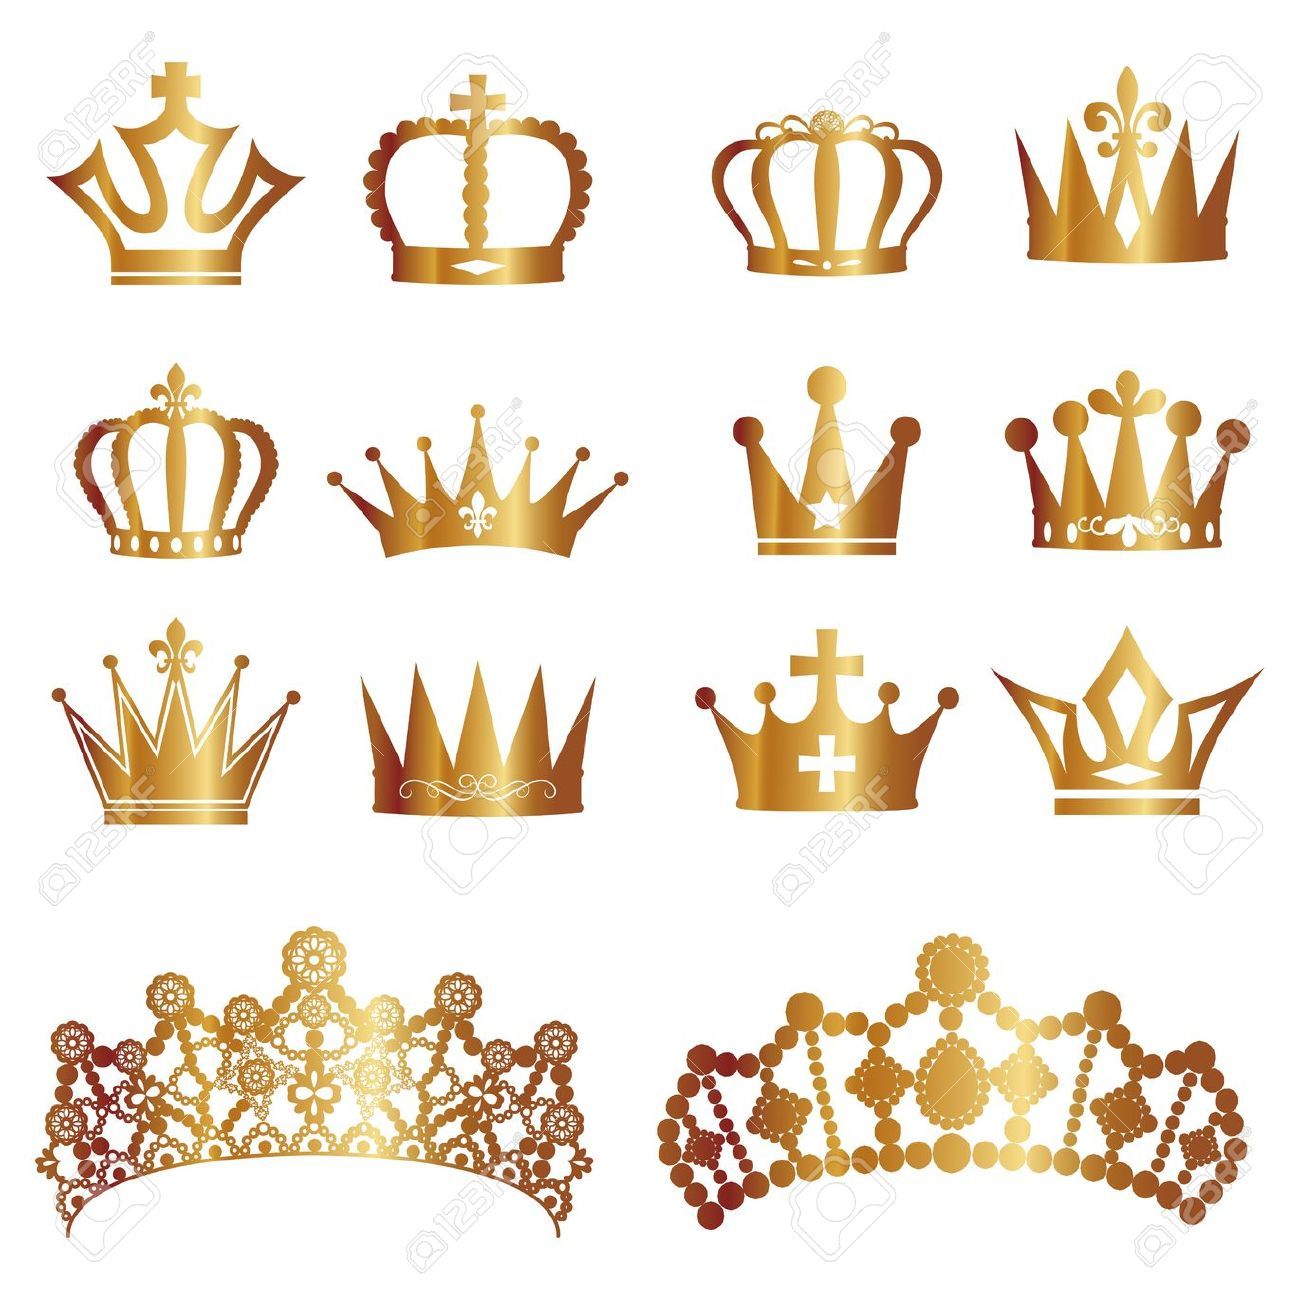 Download gold crown vector clipart 10 free Cliparts | Download ...